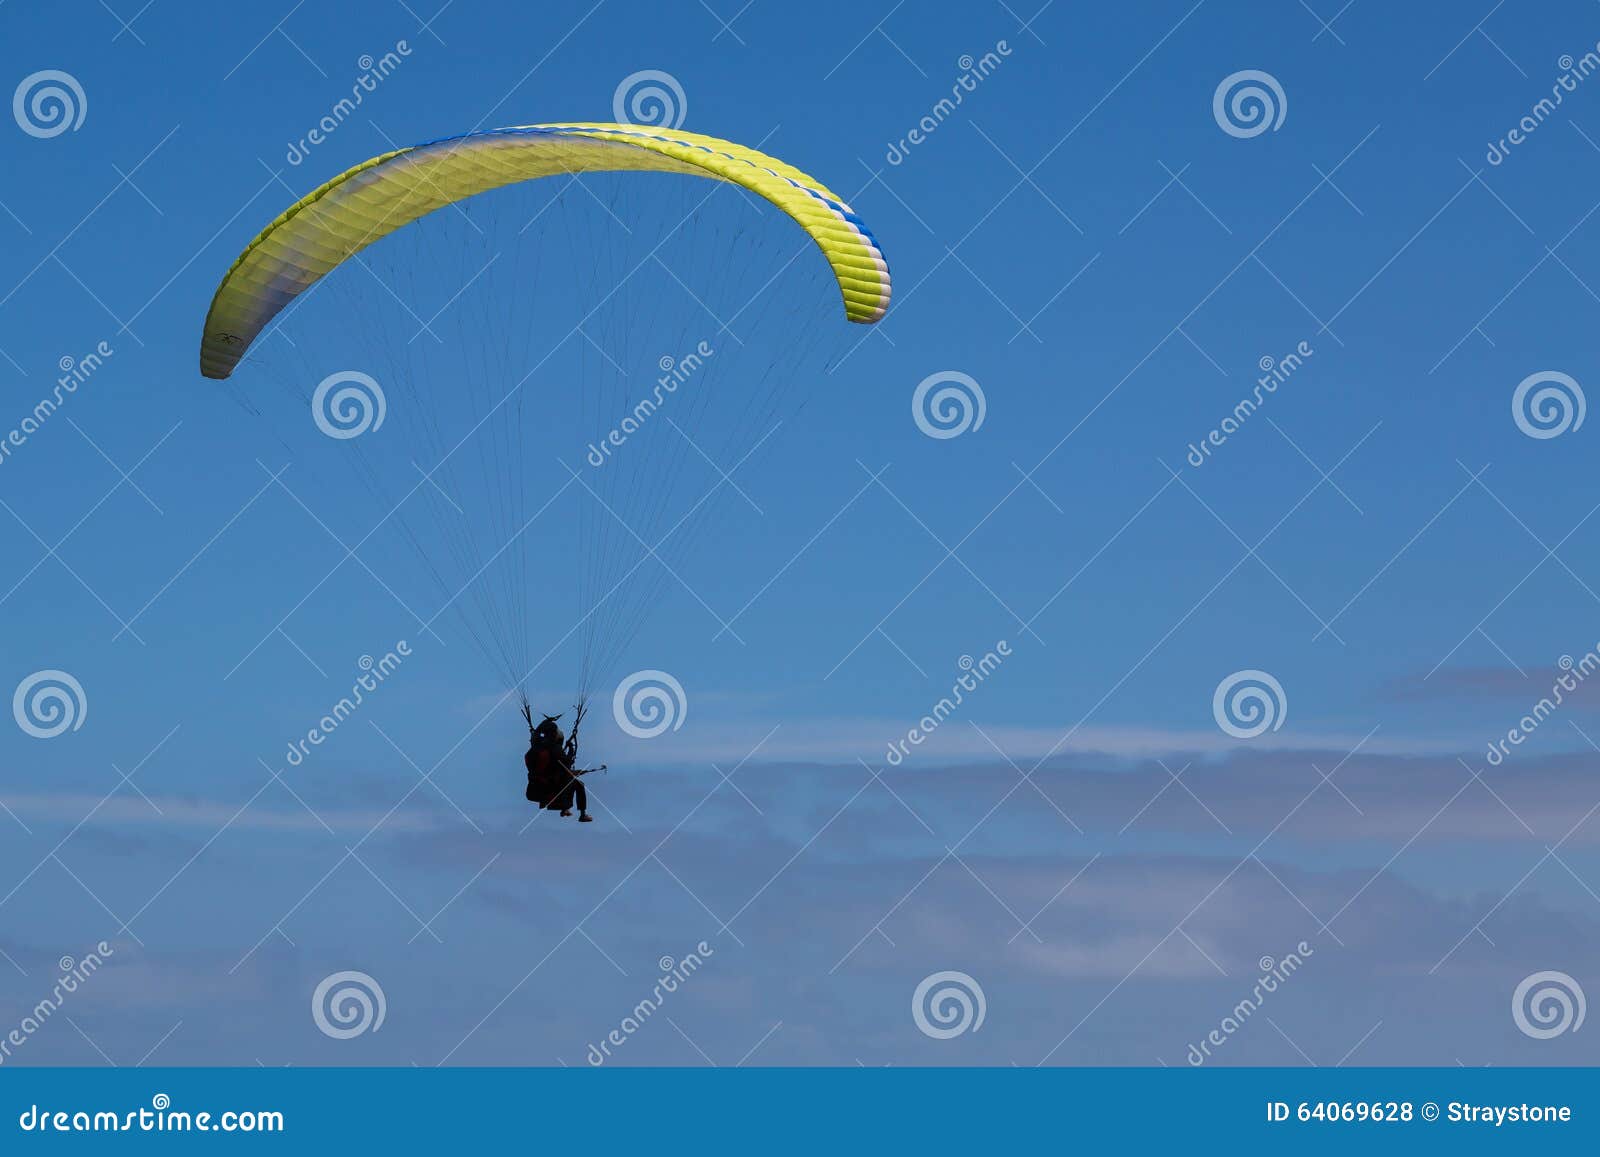 paragliding above the clouds